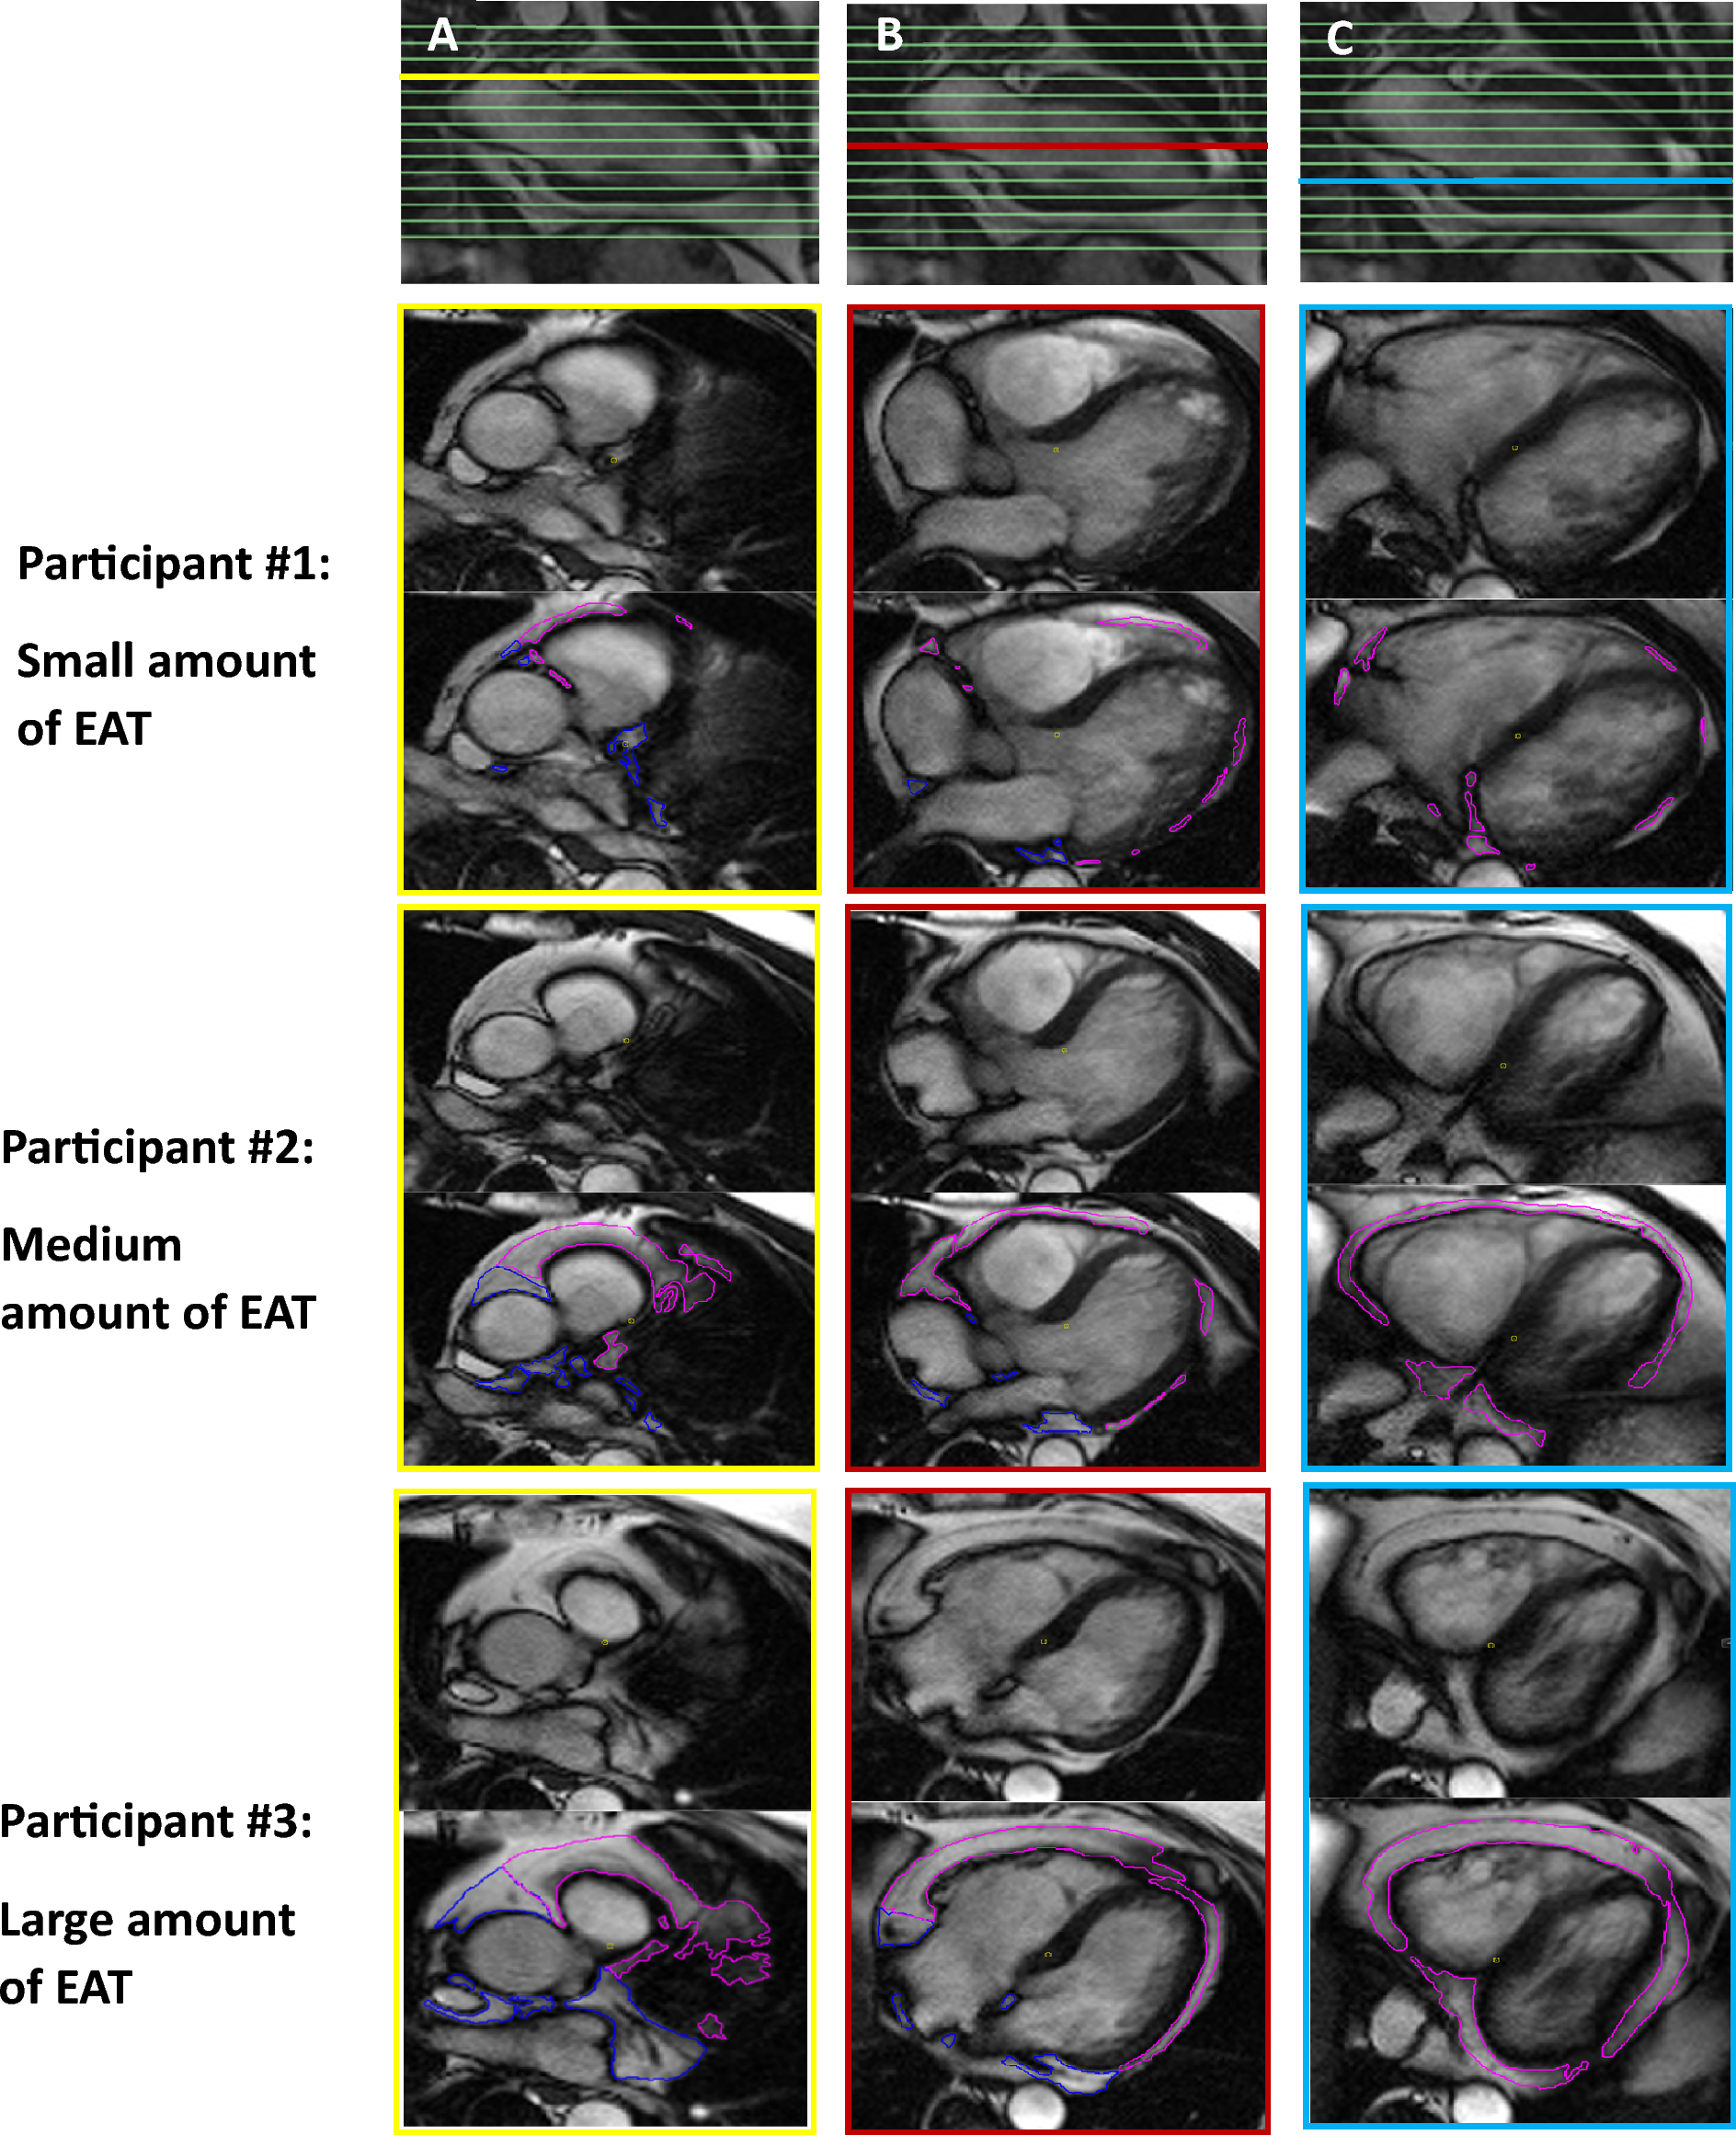 Epicardial adipose tissue and subclinical incident atrial fibrillation as detected by continuous monitoring: a cardiac magnetic resonance imaging study